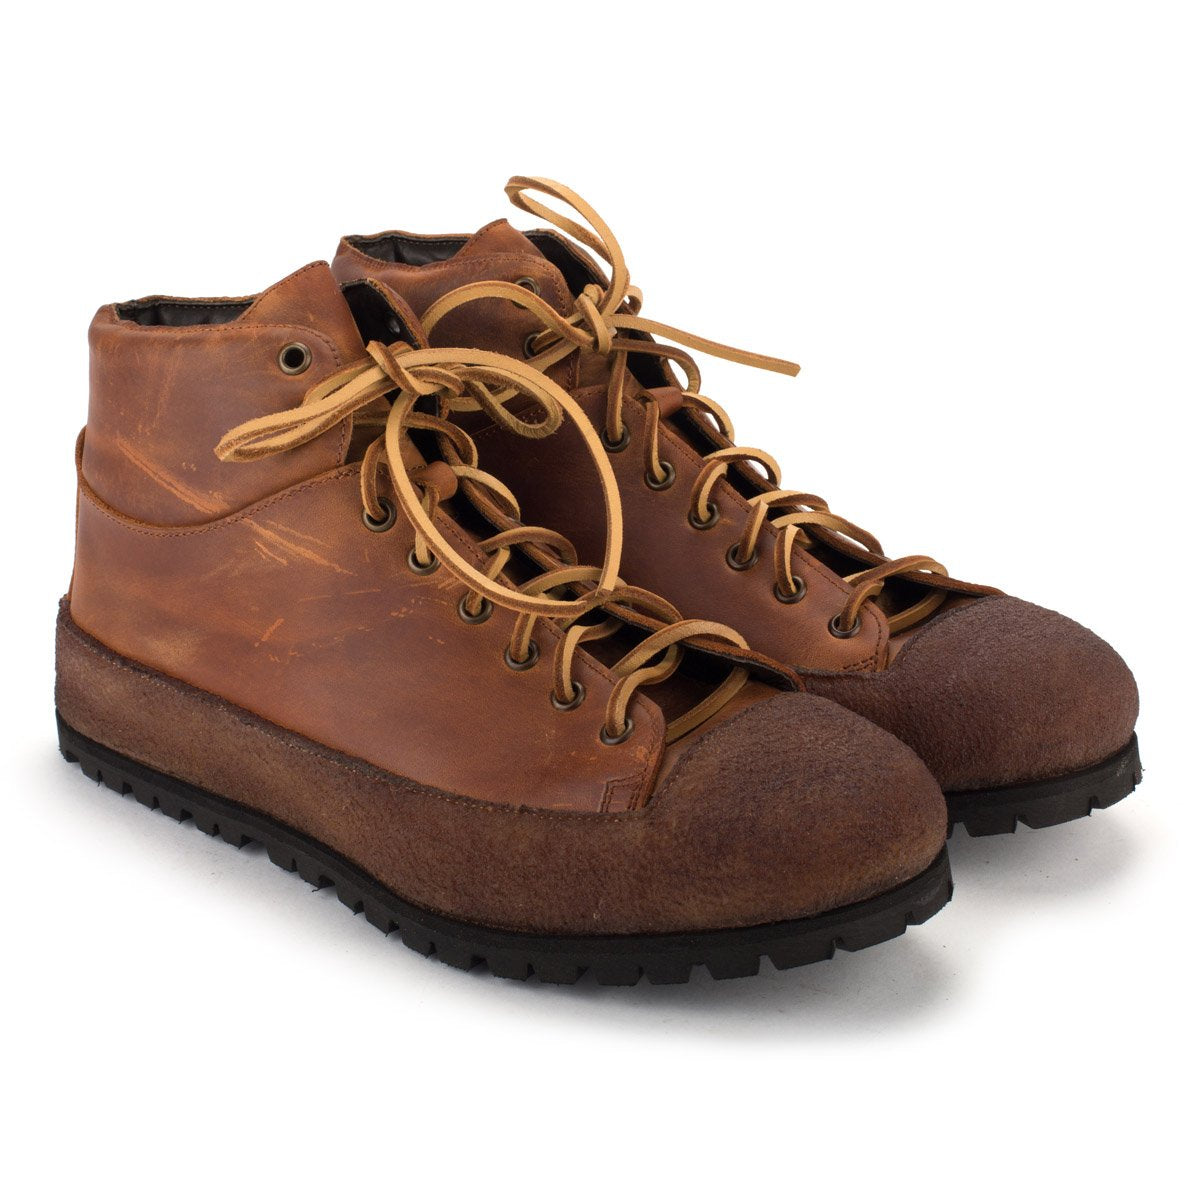 CR 24 M WATER PROOF BOOTS – Tan